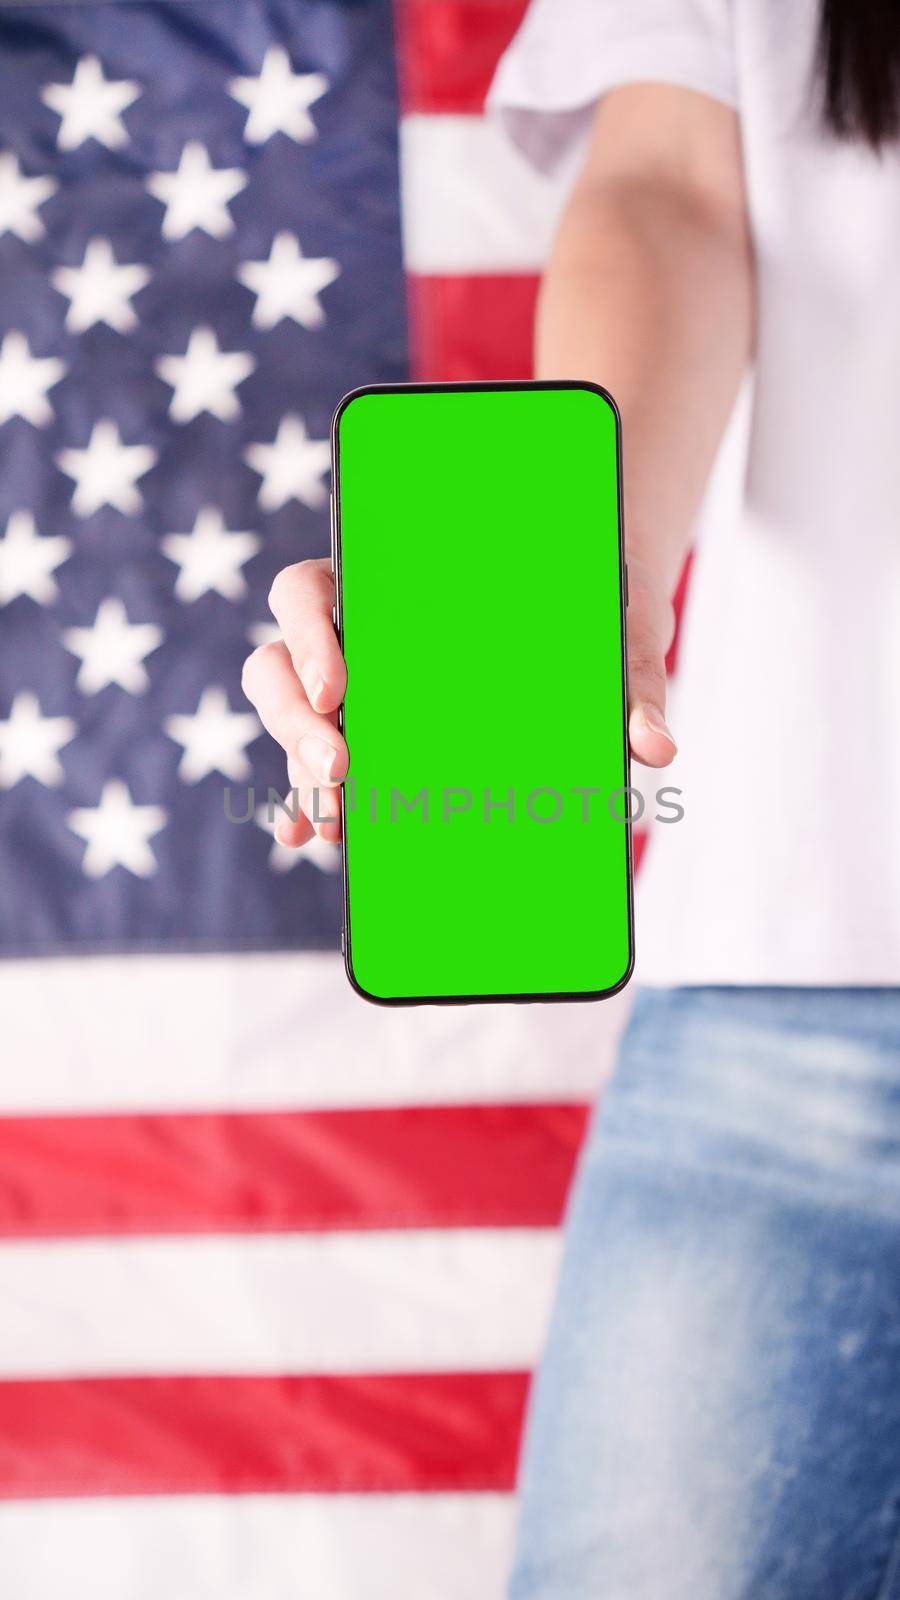 Hand holding mobile phone with green screen United states of America flag on background. Mockup phone. Labor day, 4th of July, Memorial day, 9.11